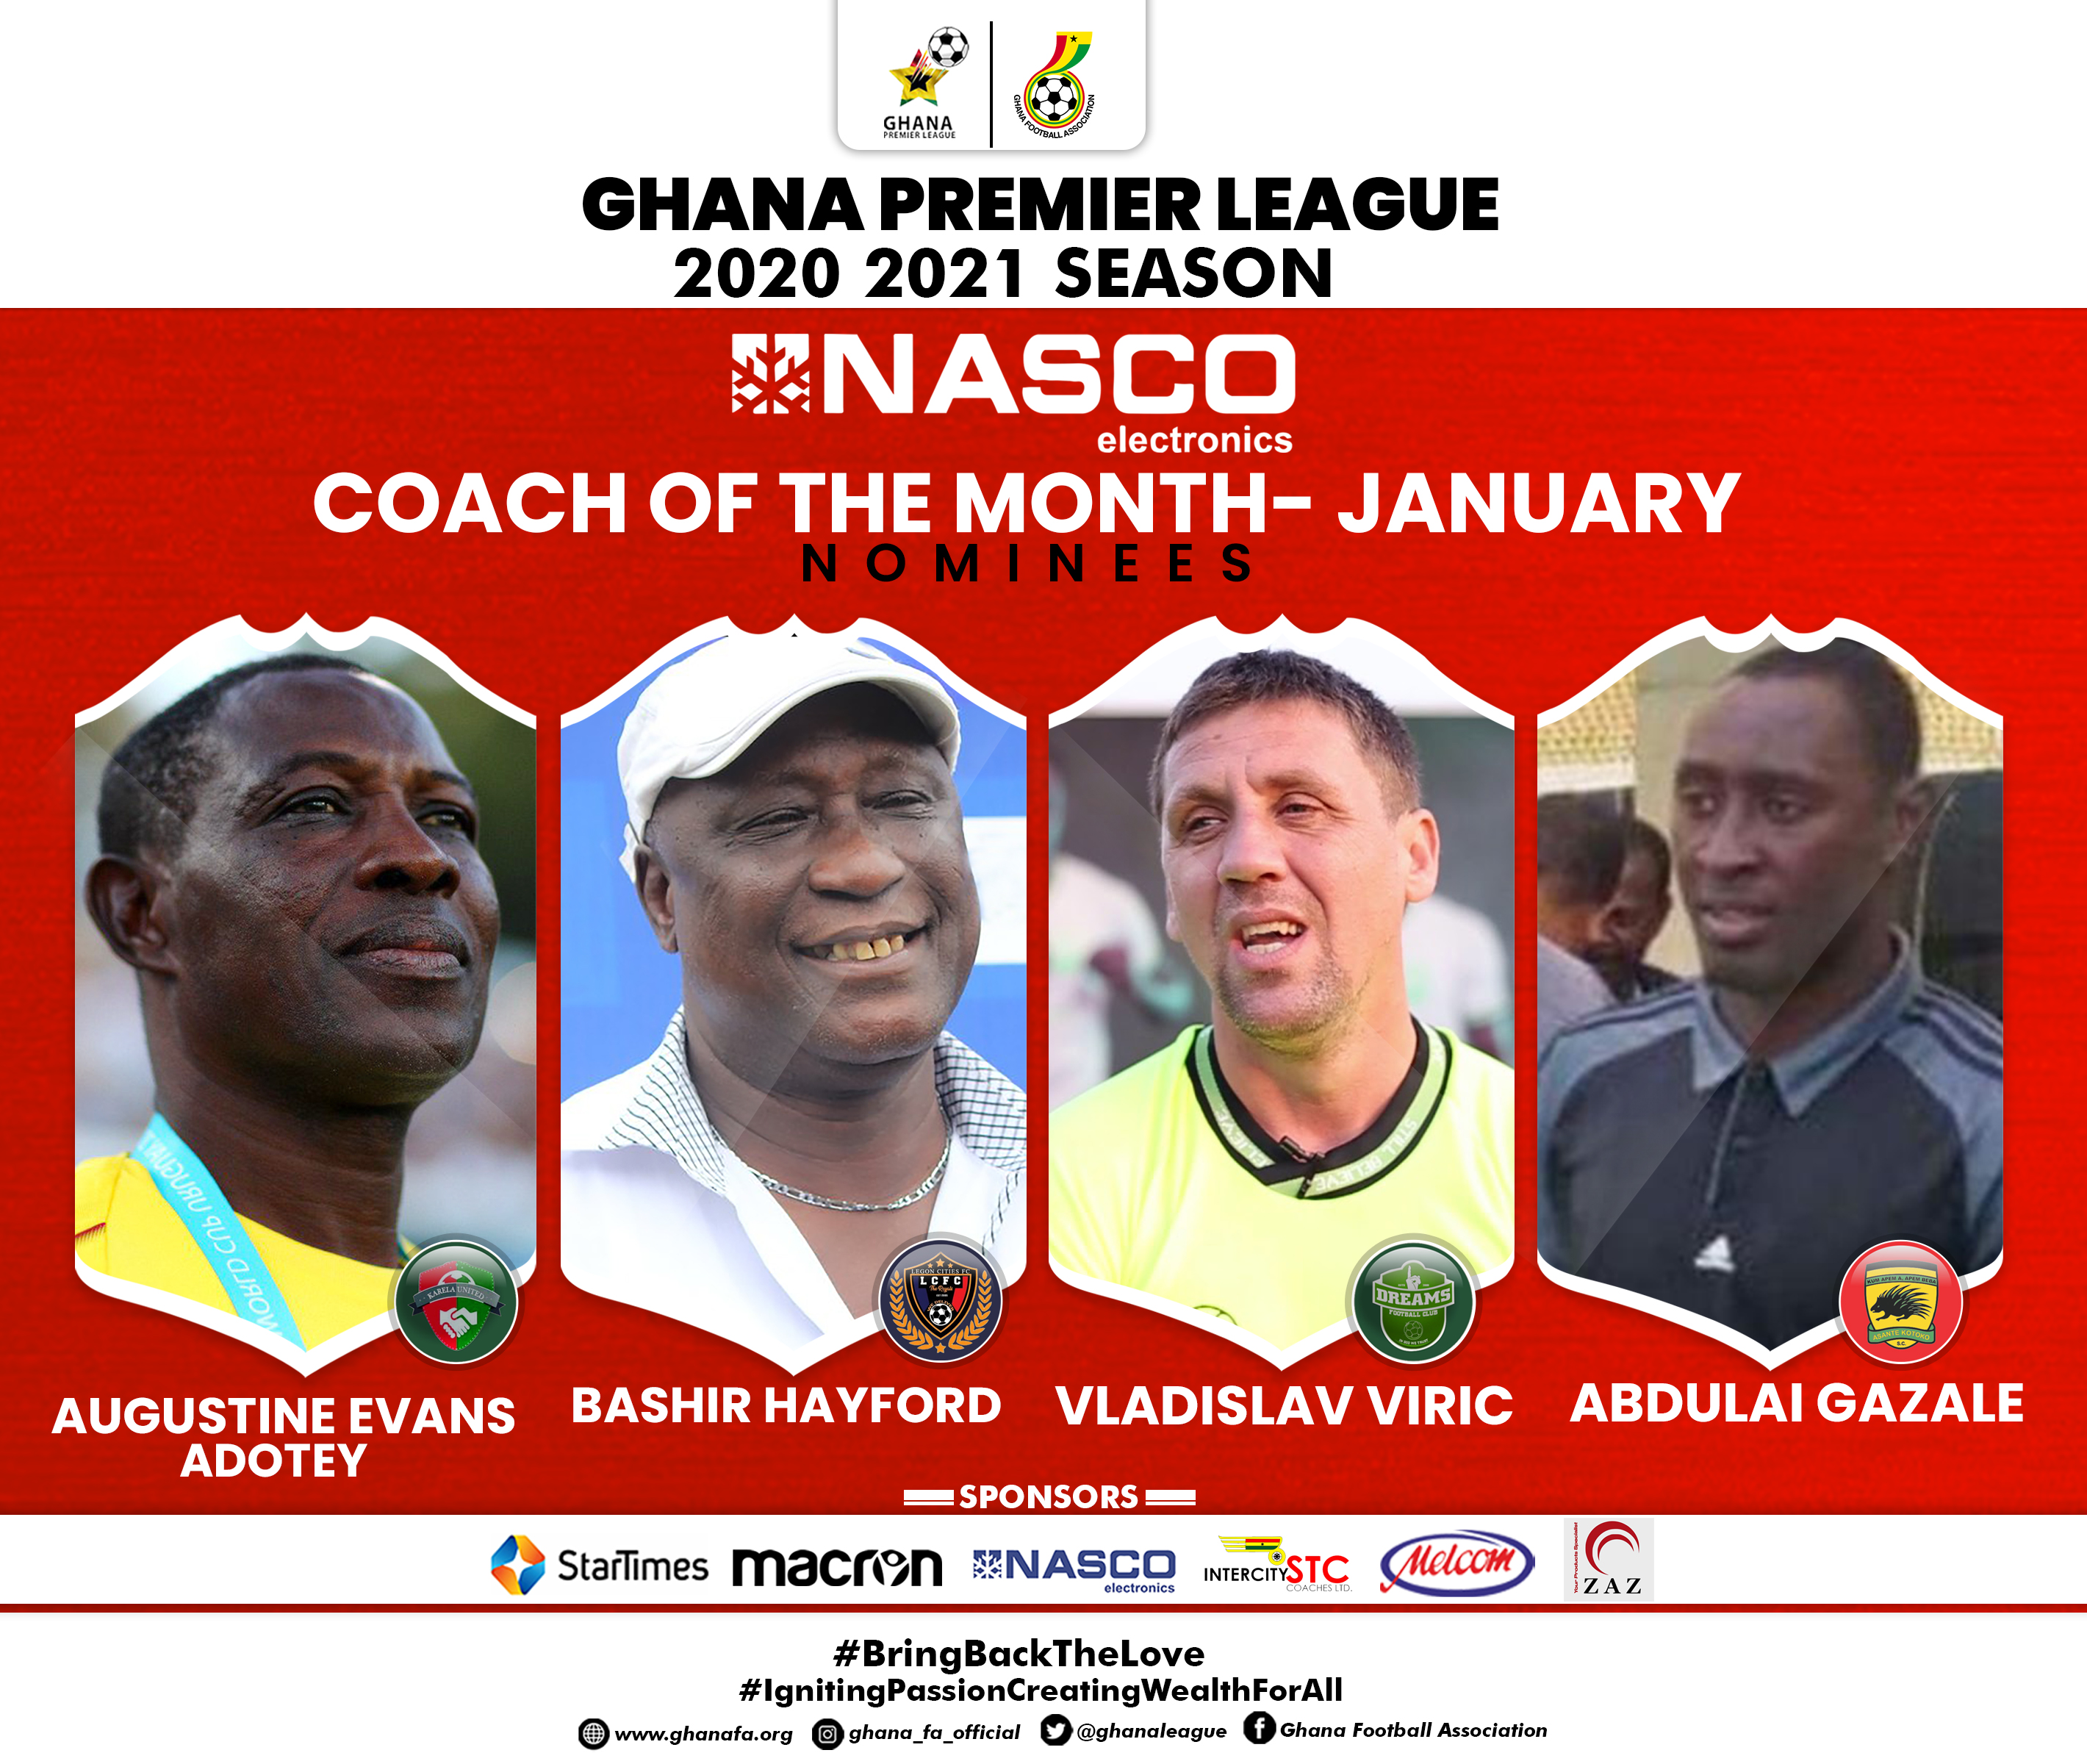 Four Coaches shortlisted for NASCO Coach of the Month Award - January